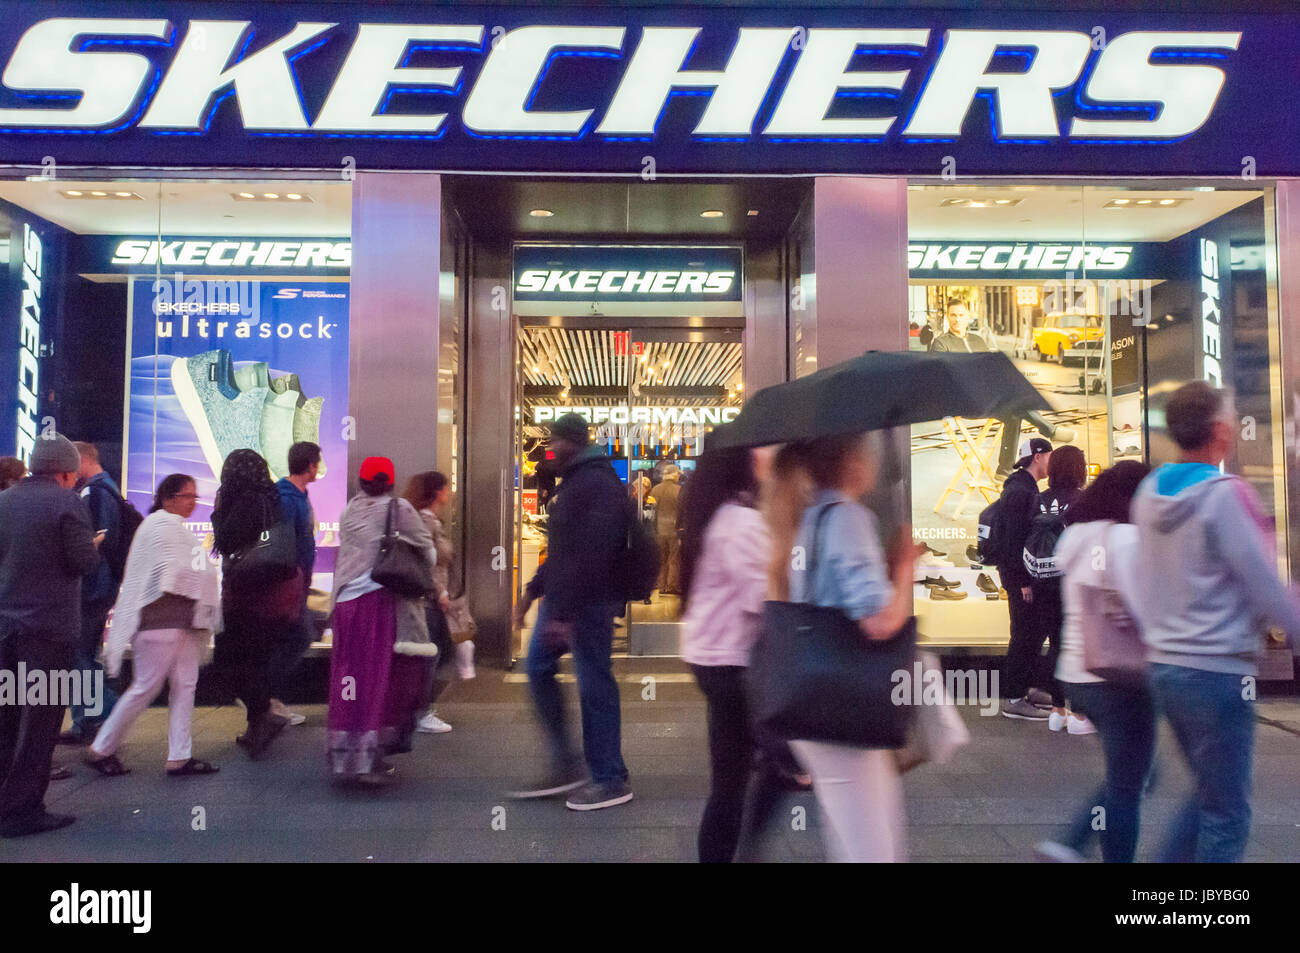 skechers new york times square